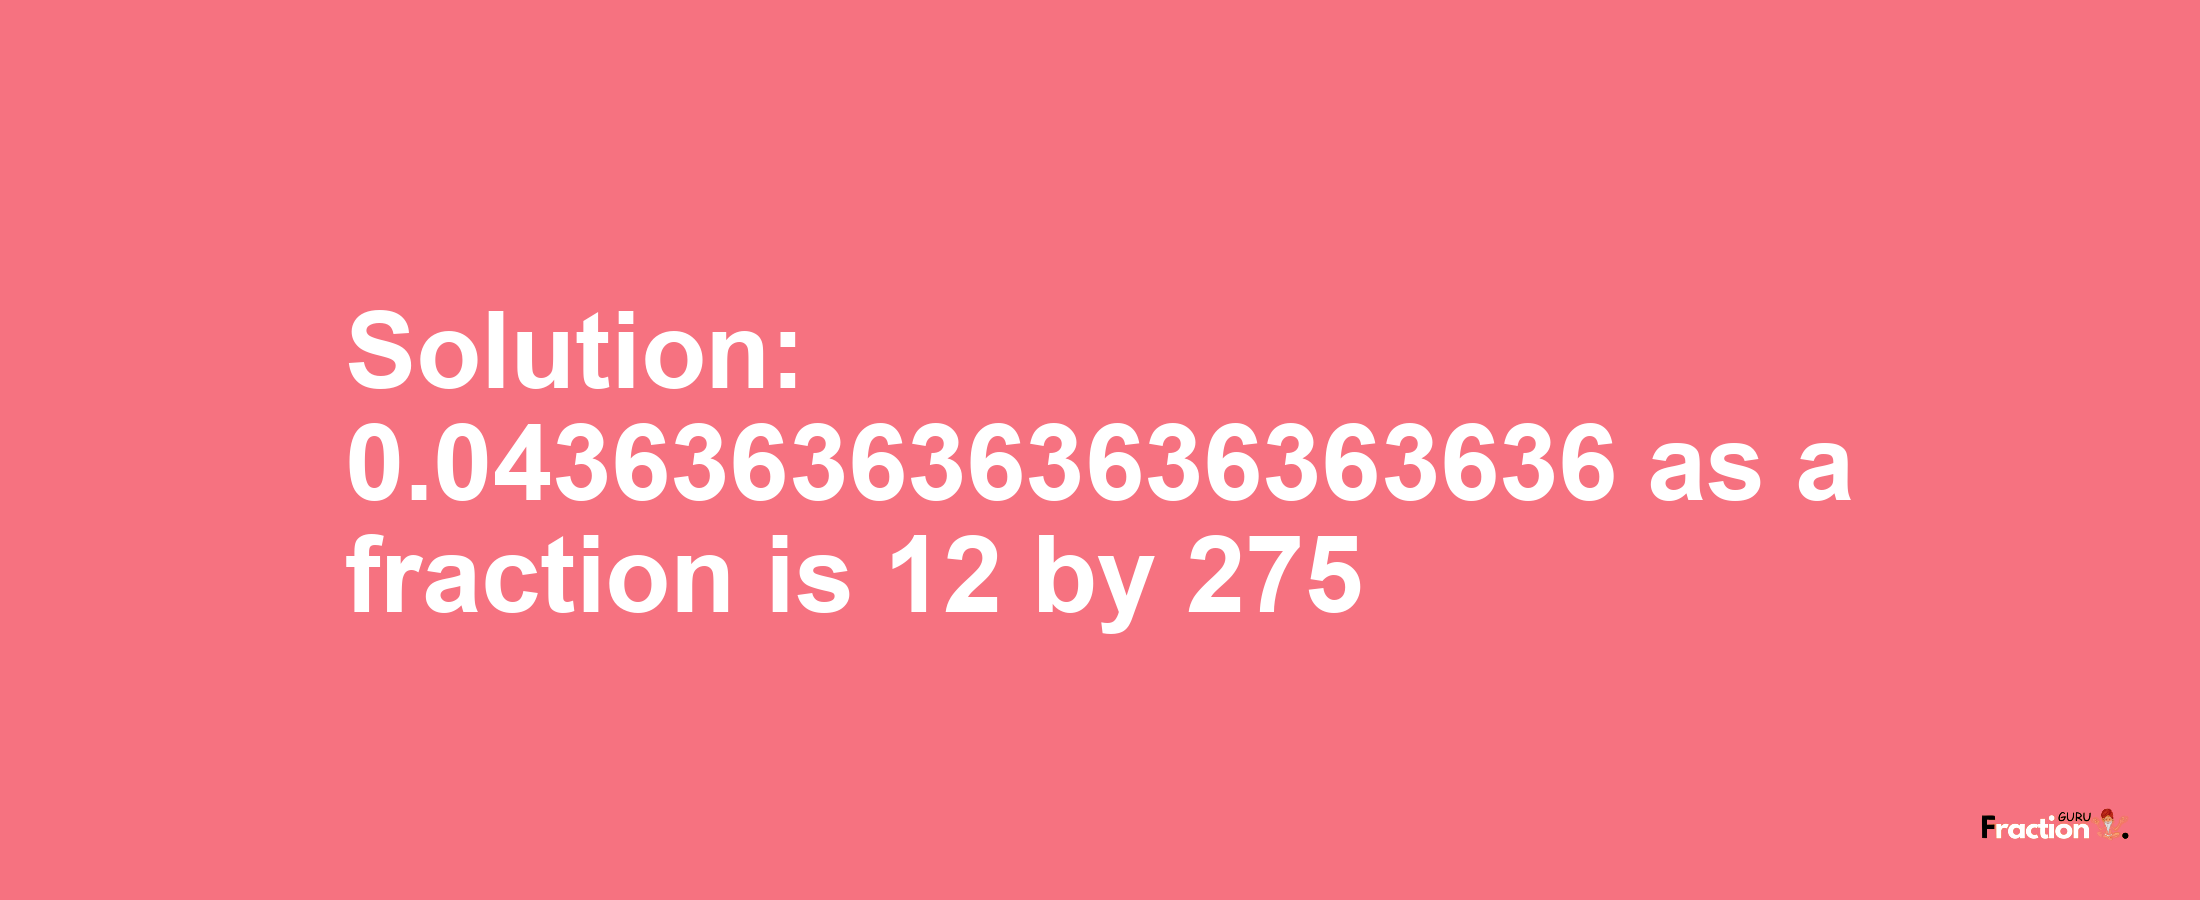 Solution:0.04363636363636363636 as a fraction is 12/275